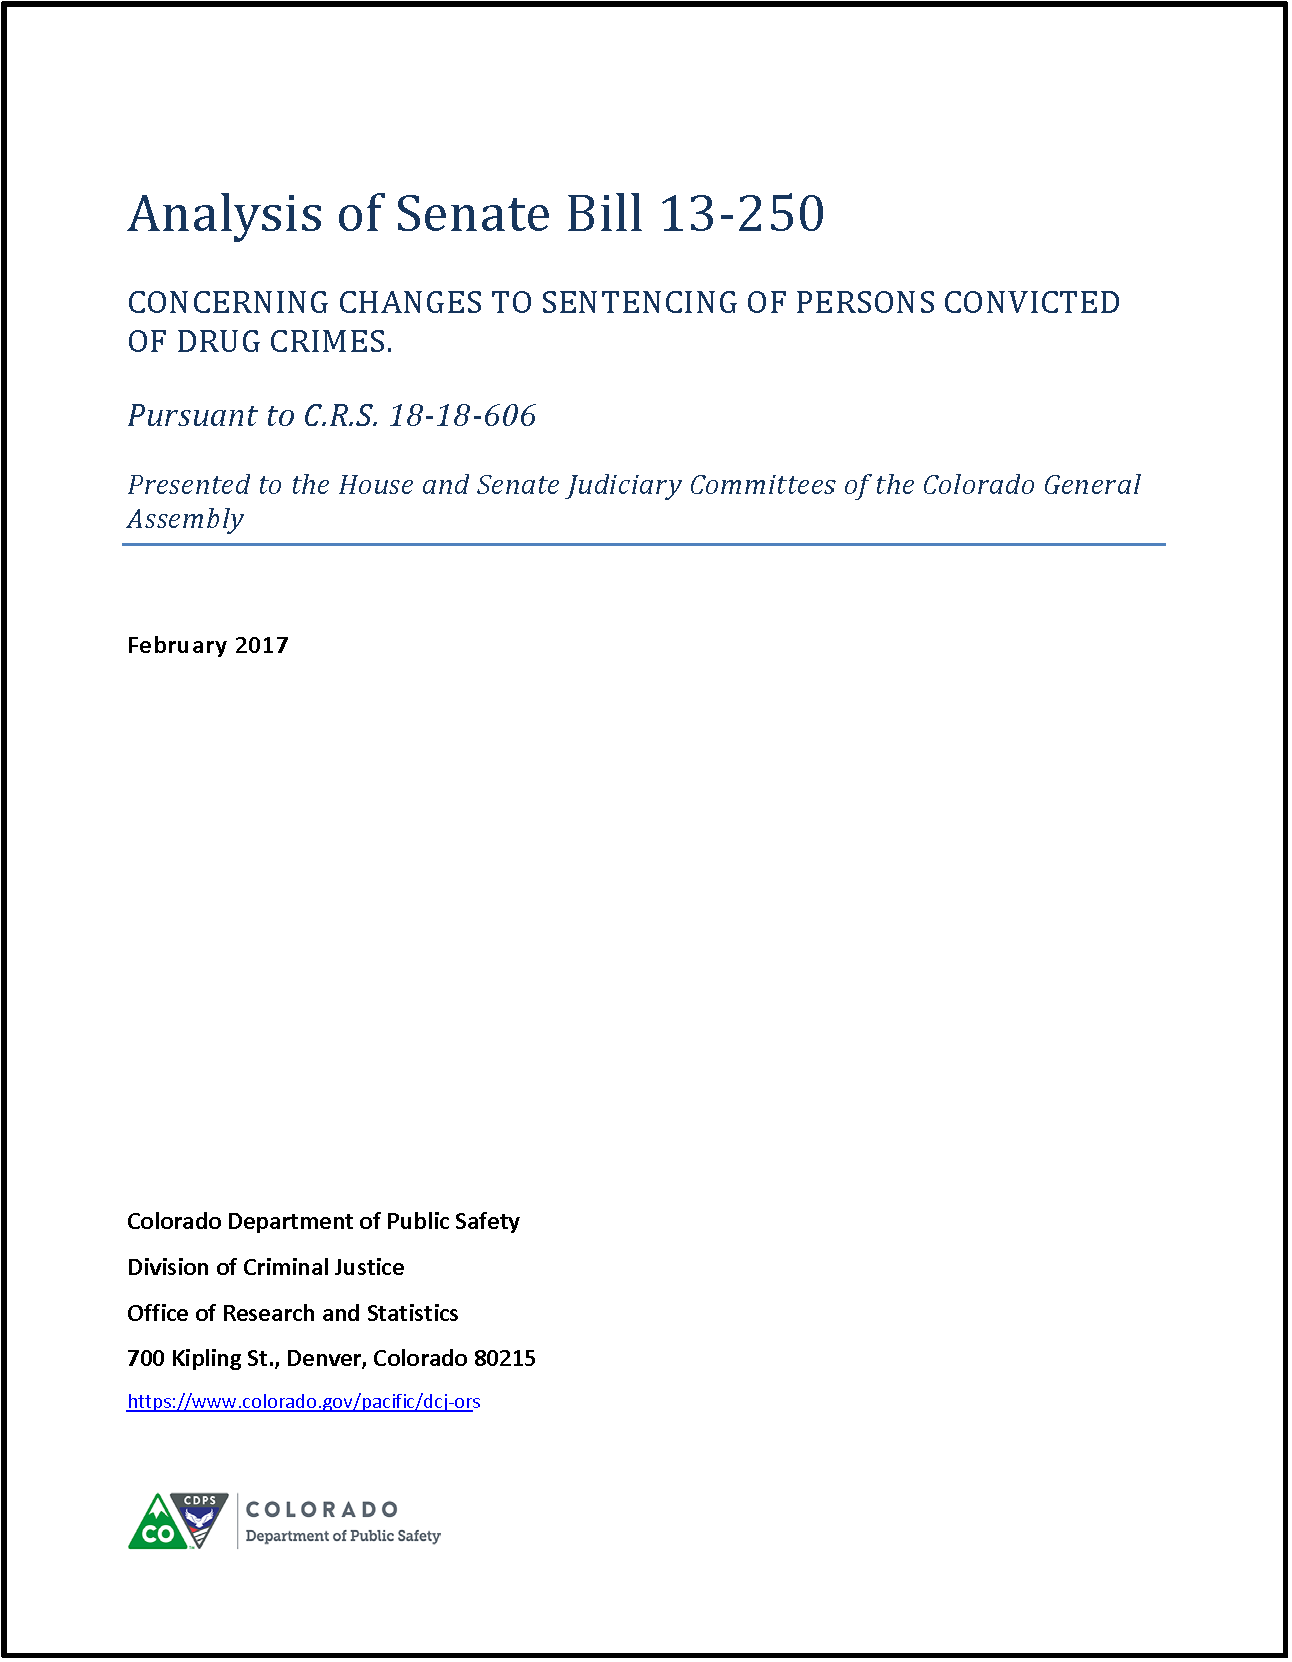 Analysis of Senate Bill 13-250: Concerning Changes to Sentencing of Persons Convicted of Drug Crimes(February 2017)